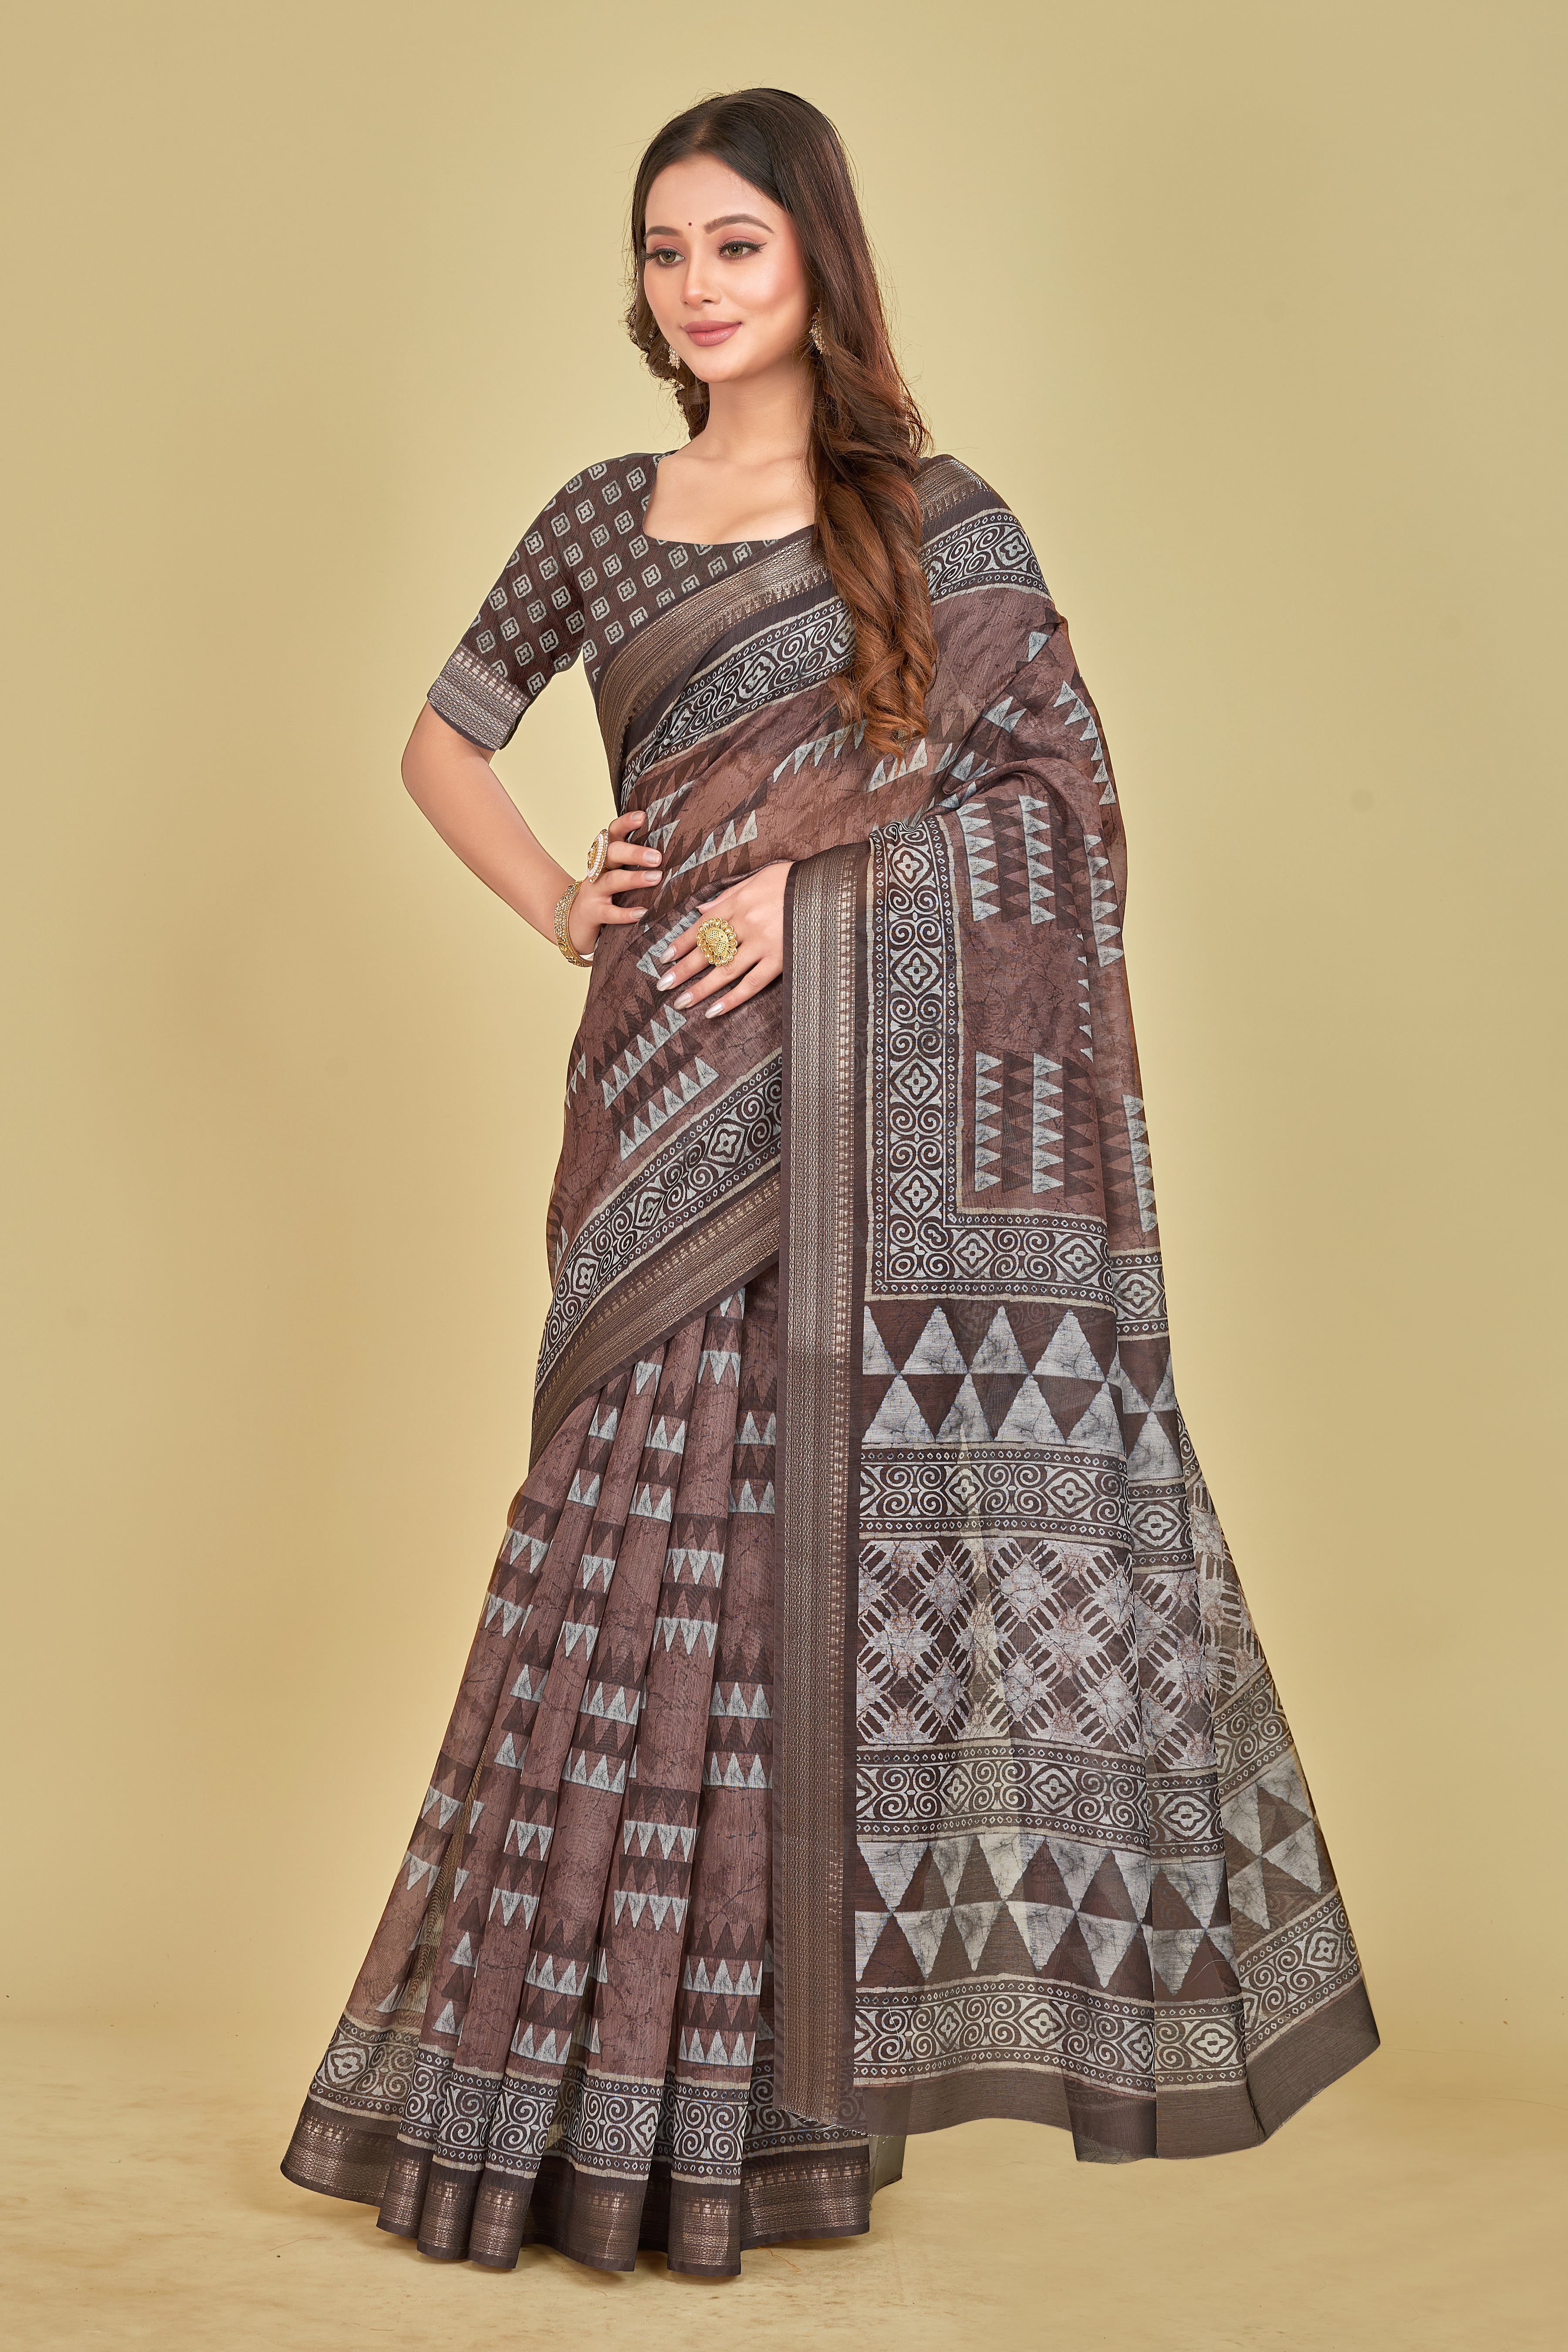 Rosy Brown Abstract Digital Printed Mulberry Silk Saree